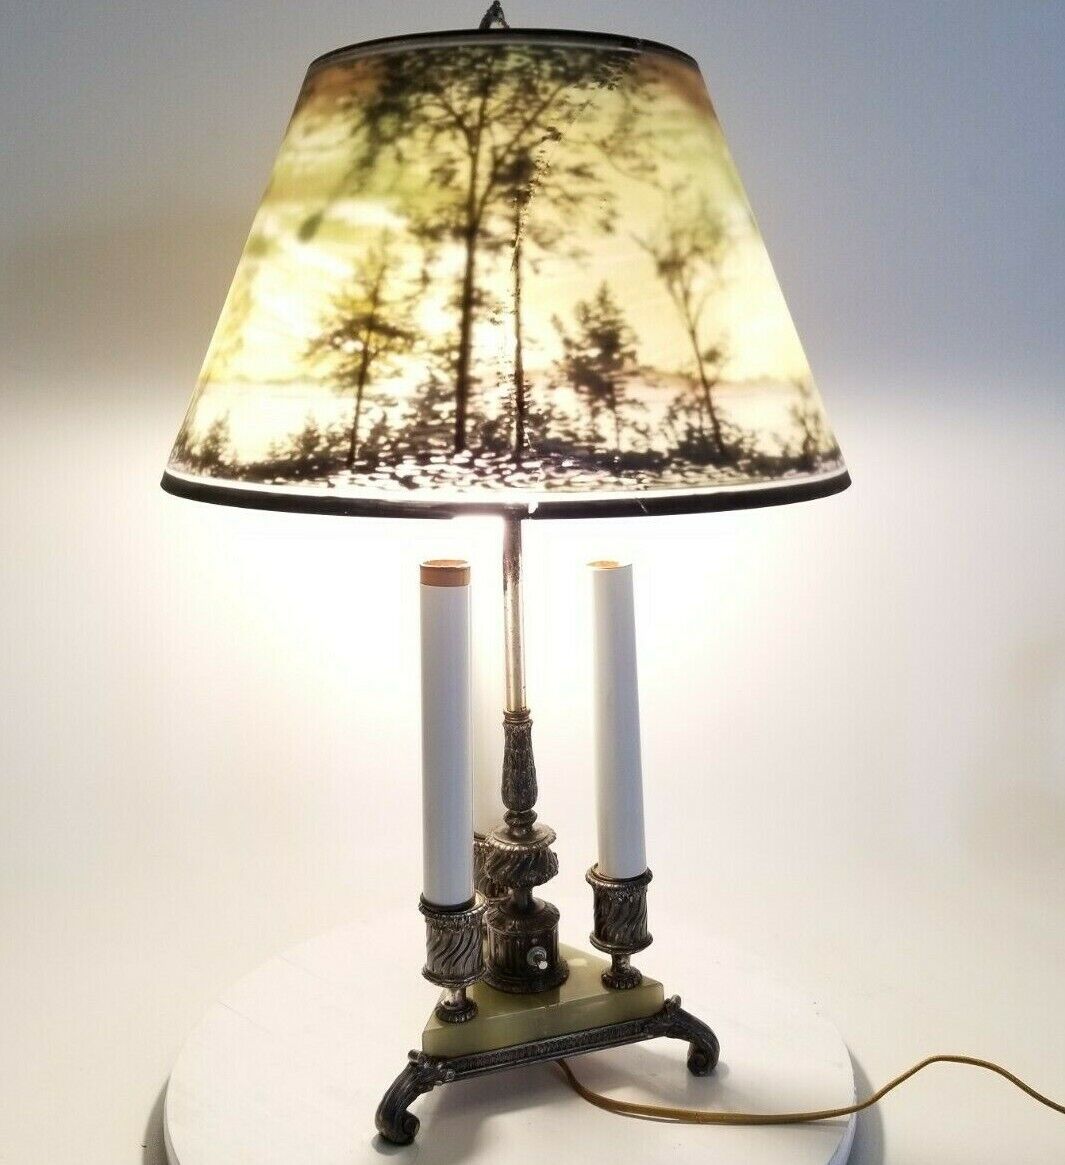 Authentic Pairpoint Lamp Forest Reverse Painted Florence Shade Tiffany era